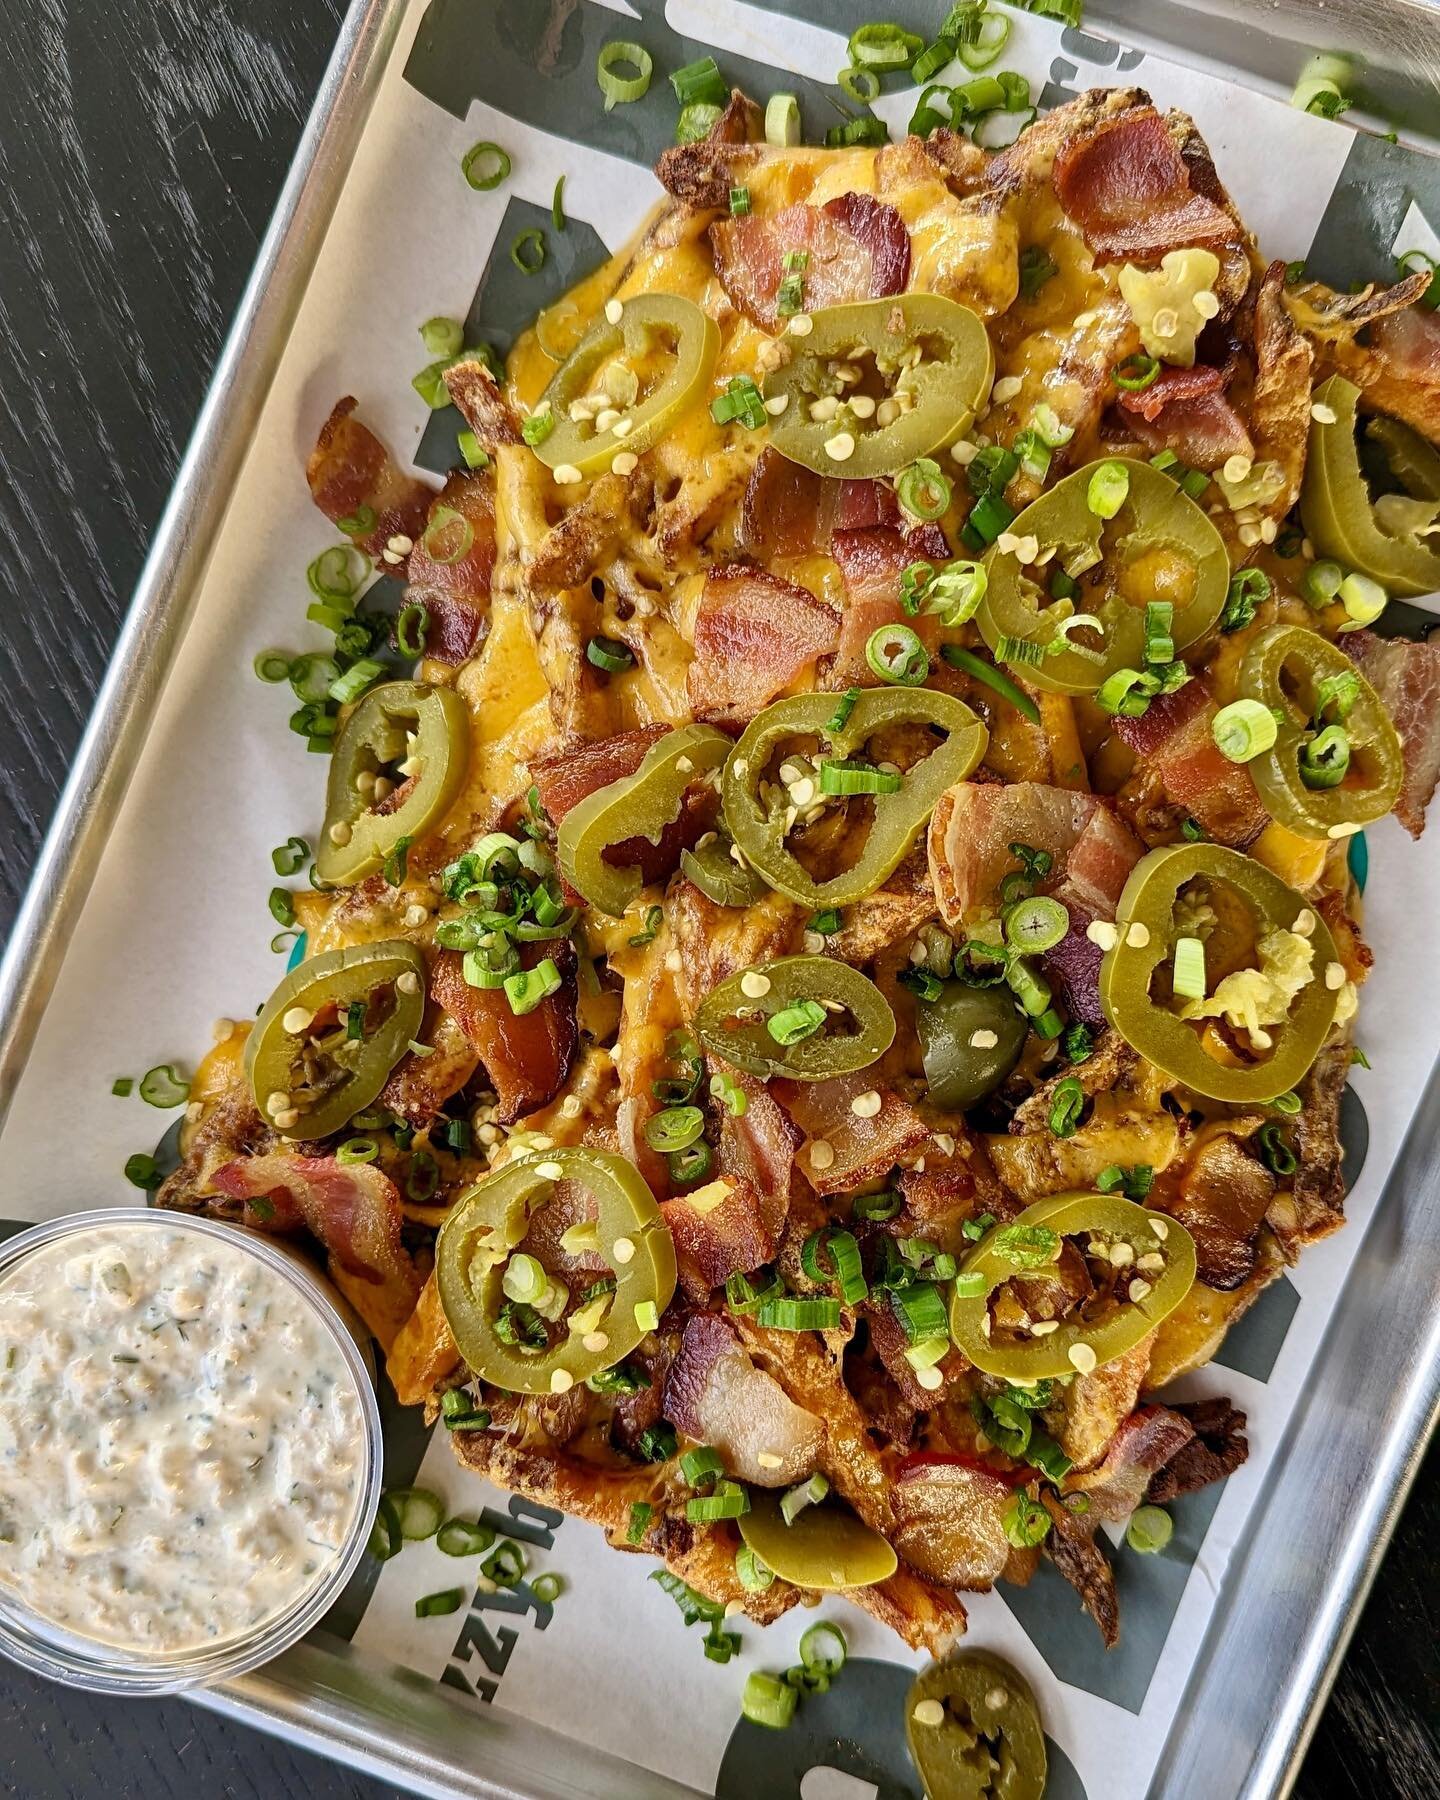 Got Saturday cravings? Meet @eazzyburger's Cheazzy Fries! 🍟🧀 Crispy hand-cut russets, smoked cheddar, bacon, pickled jalape&ntilde;os, scallions, and our house made Fried Pickle Ranch. One bite, and your weekend just got a whole lot tastier. 😋 #Ea